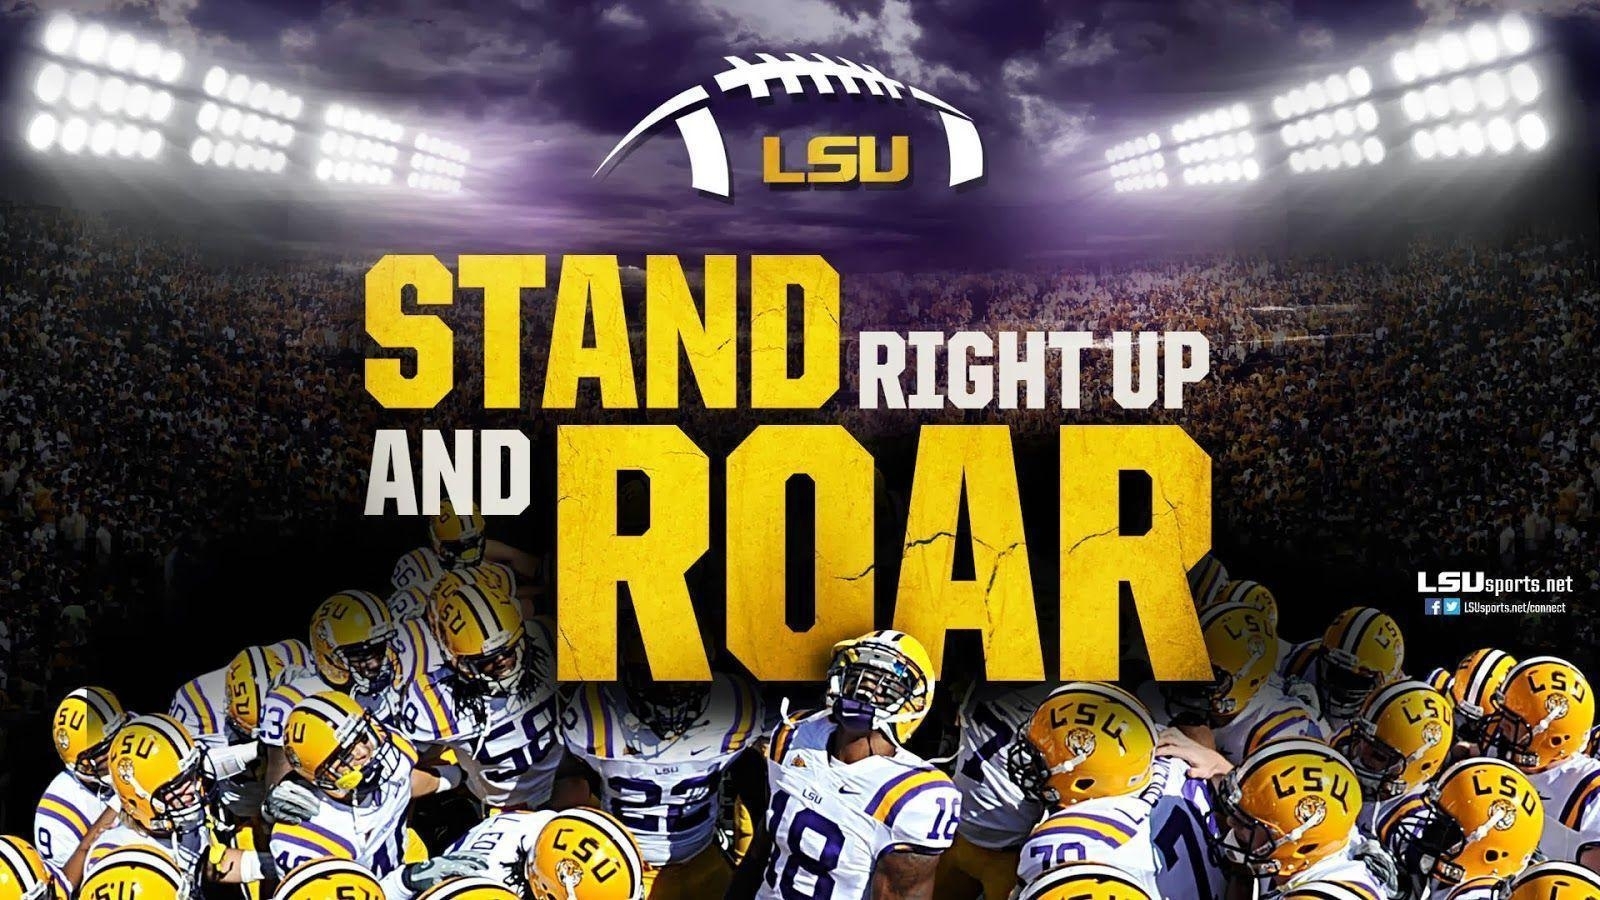 10 Latest Lsu Football 2015 Wallpaper FULL HD 1080p For PC Background